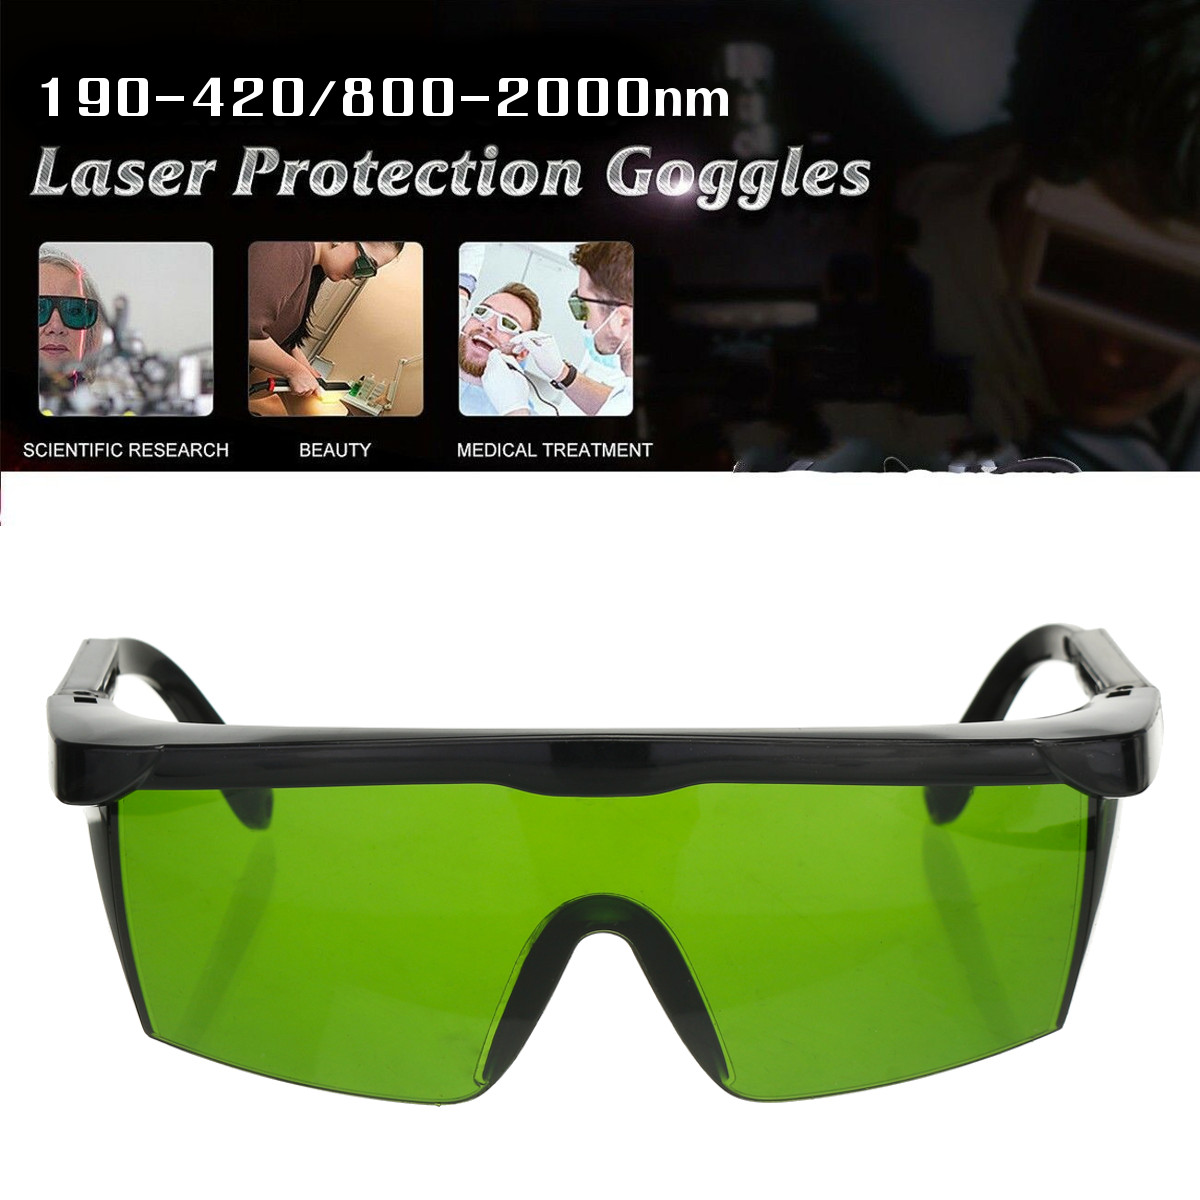 Pro Laser Protection Goggles Protective Safety Glasses IPL OD+4D 190nm-2000nm Laser Goggles 19